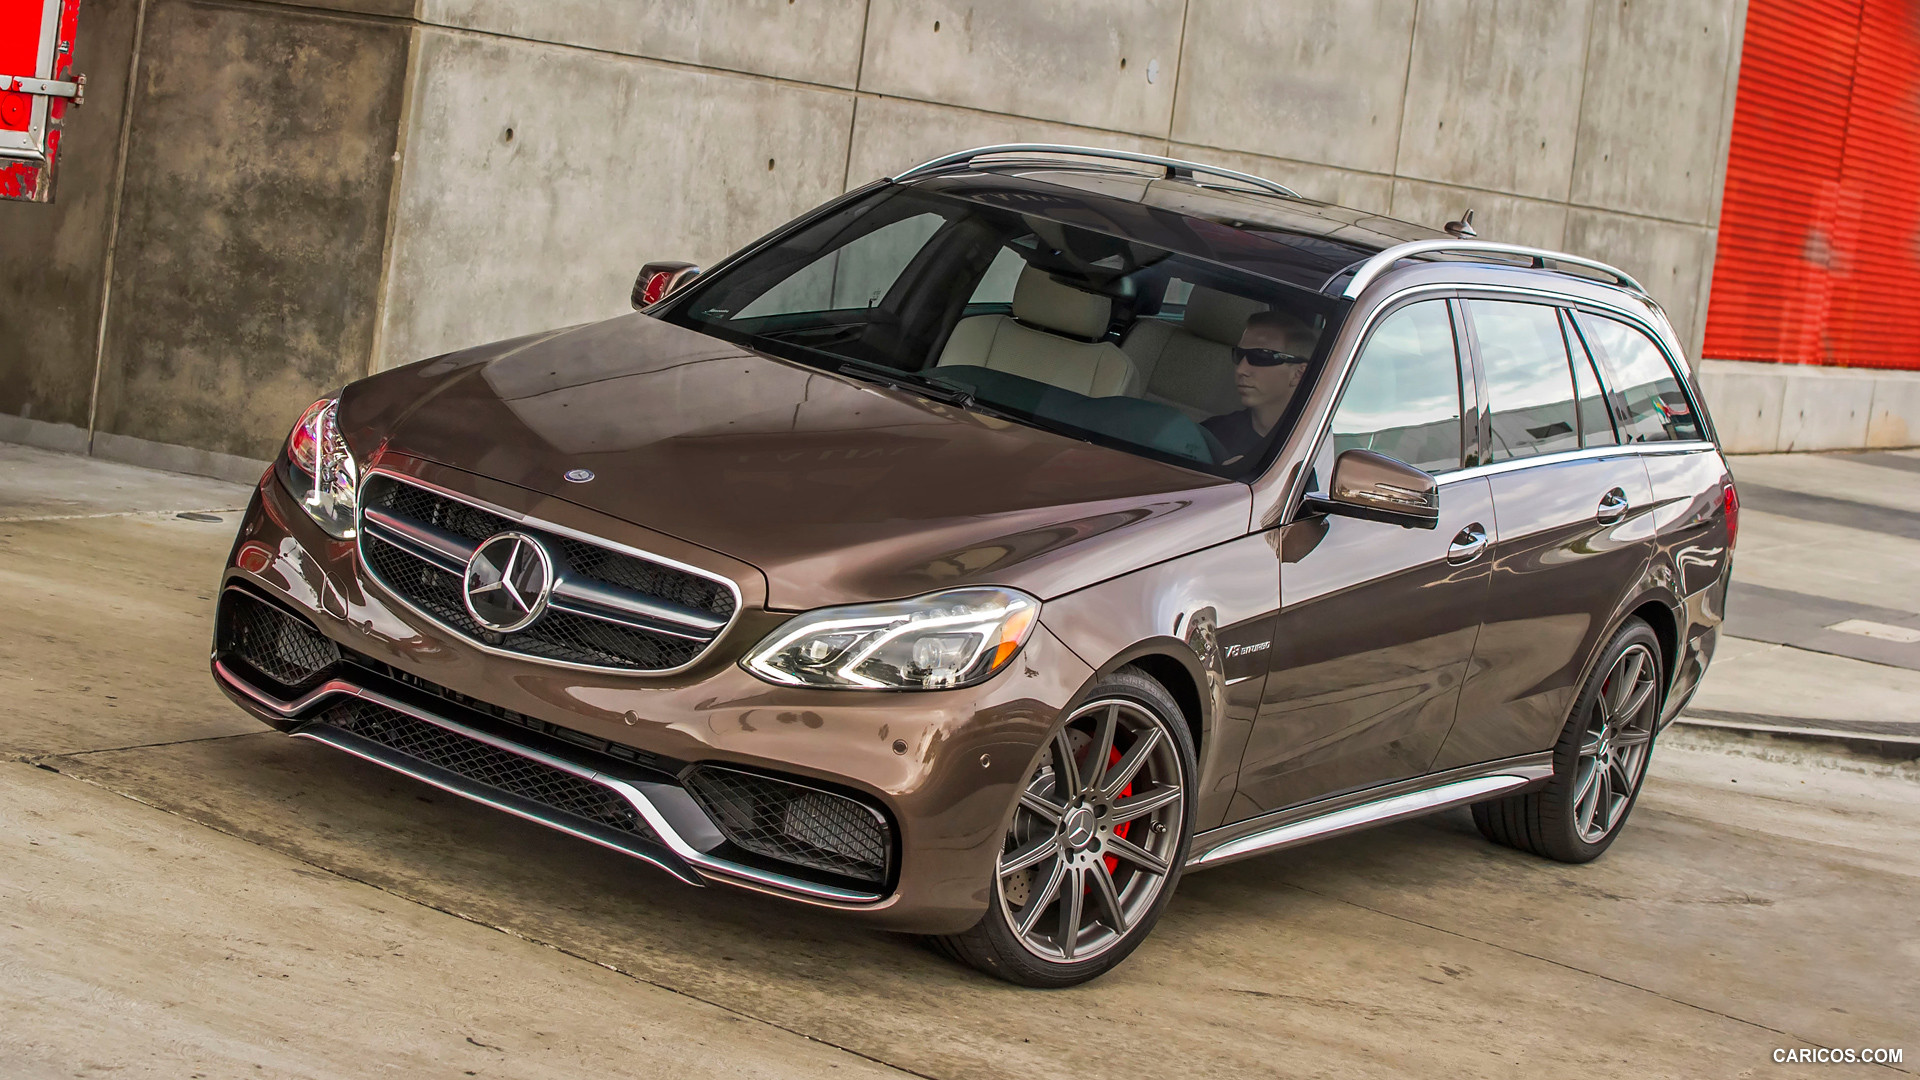  2014 Mercedes-Benz E 63 AMG S-Model Wagon (US Version) - Front, #19 of 27